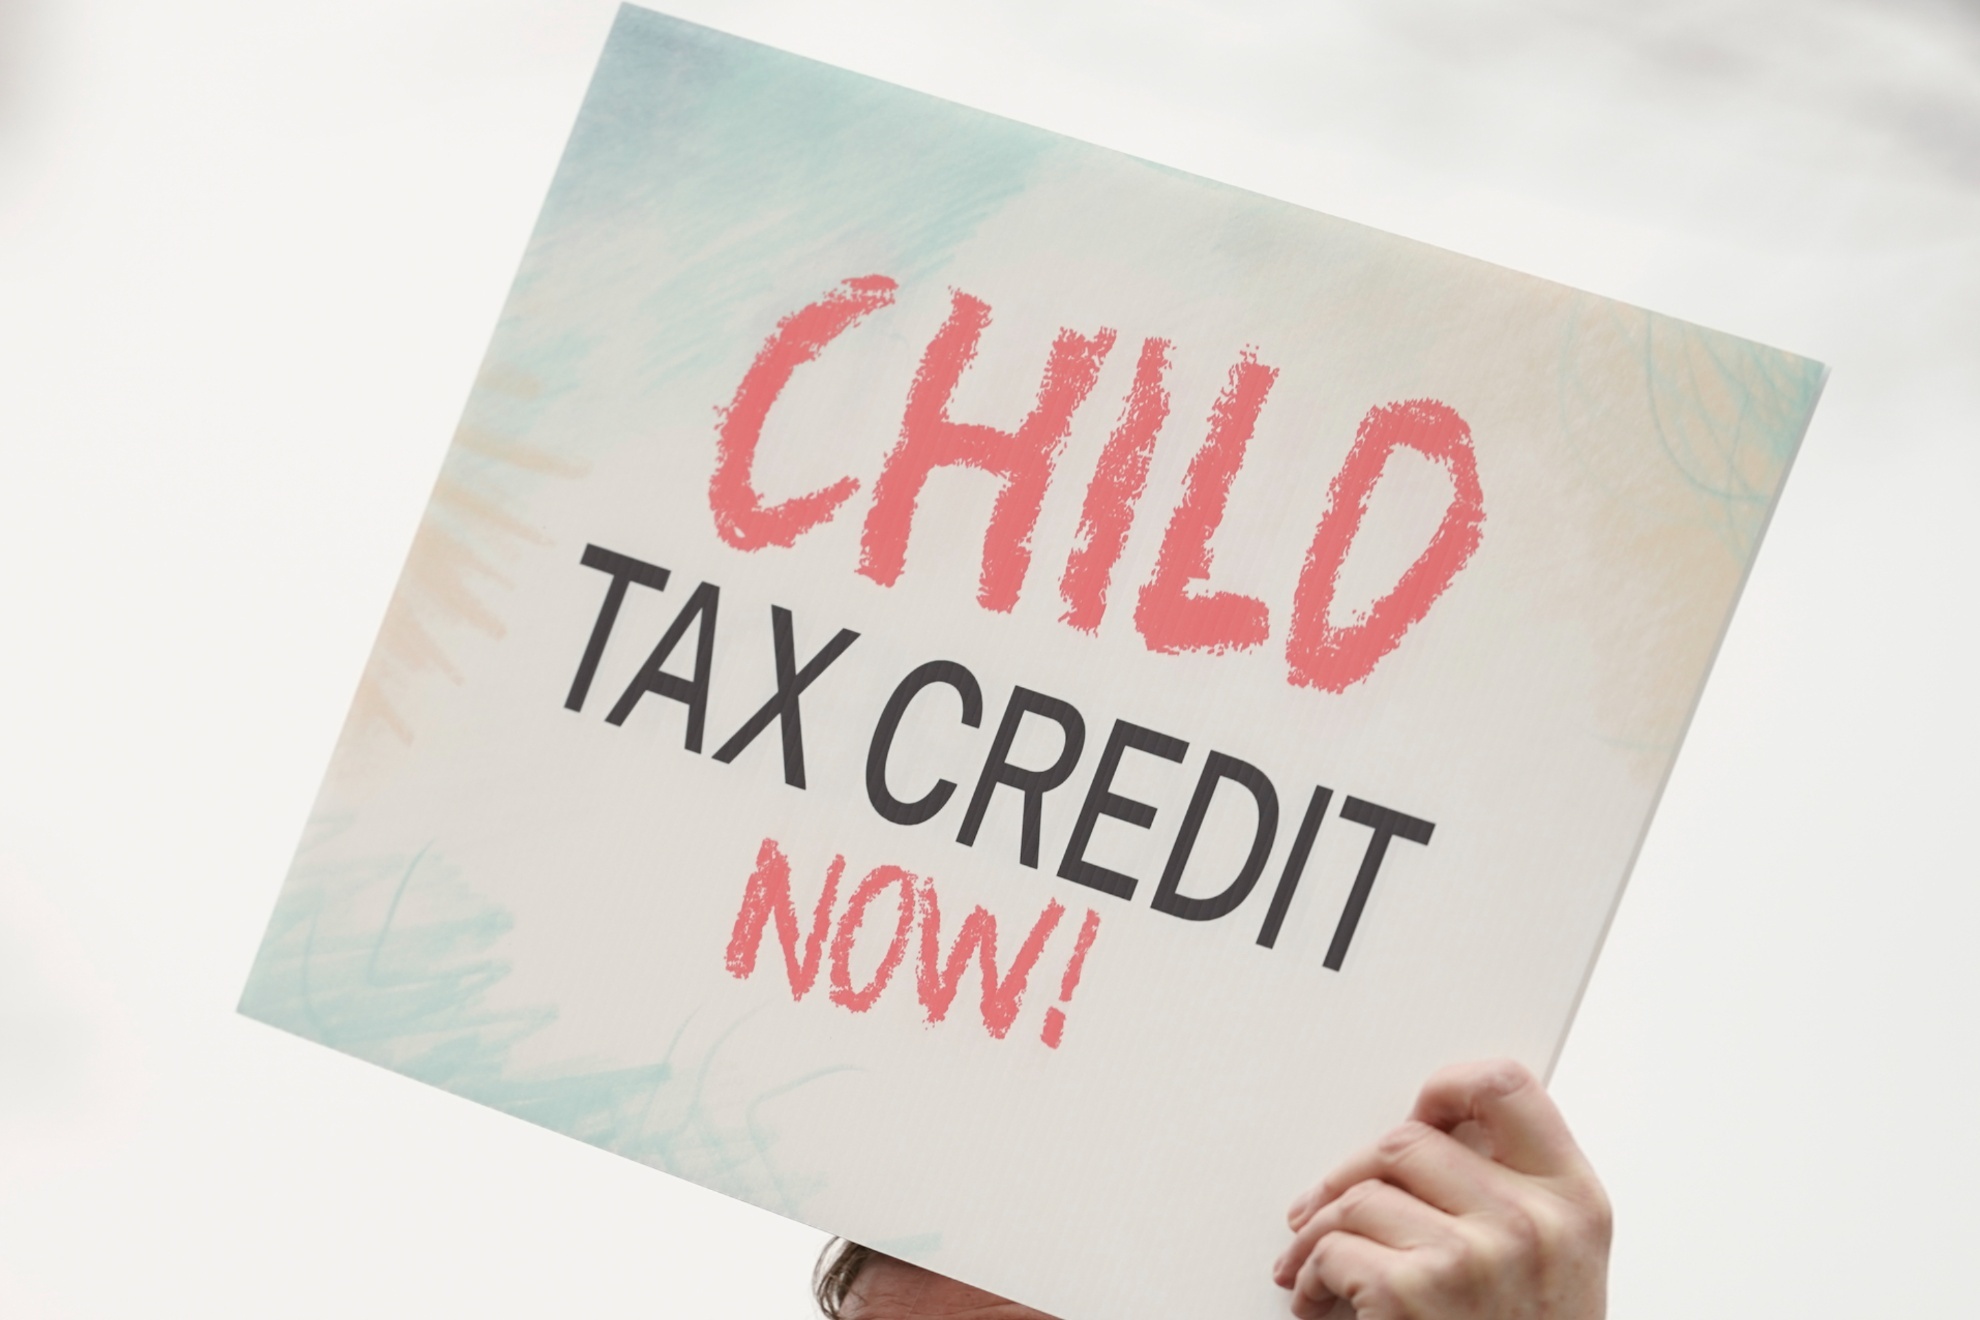 A child tax credit sign in D.C.